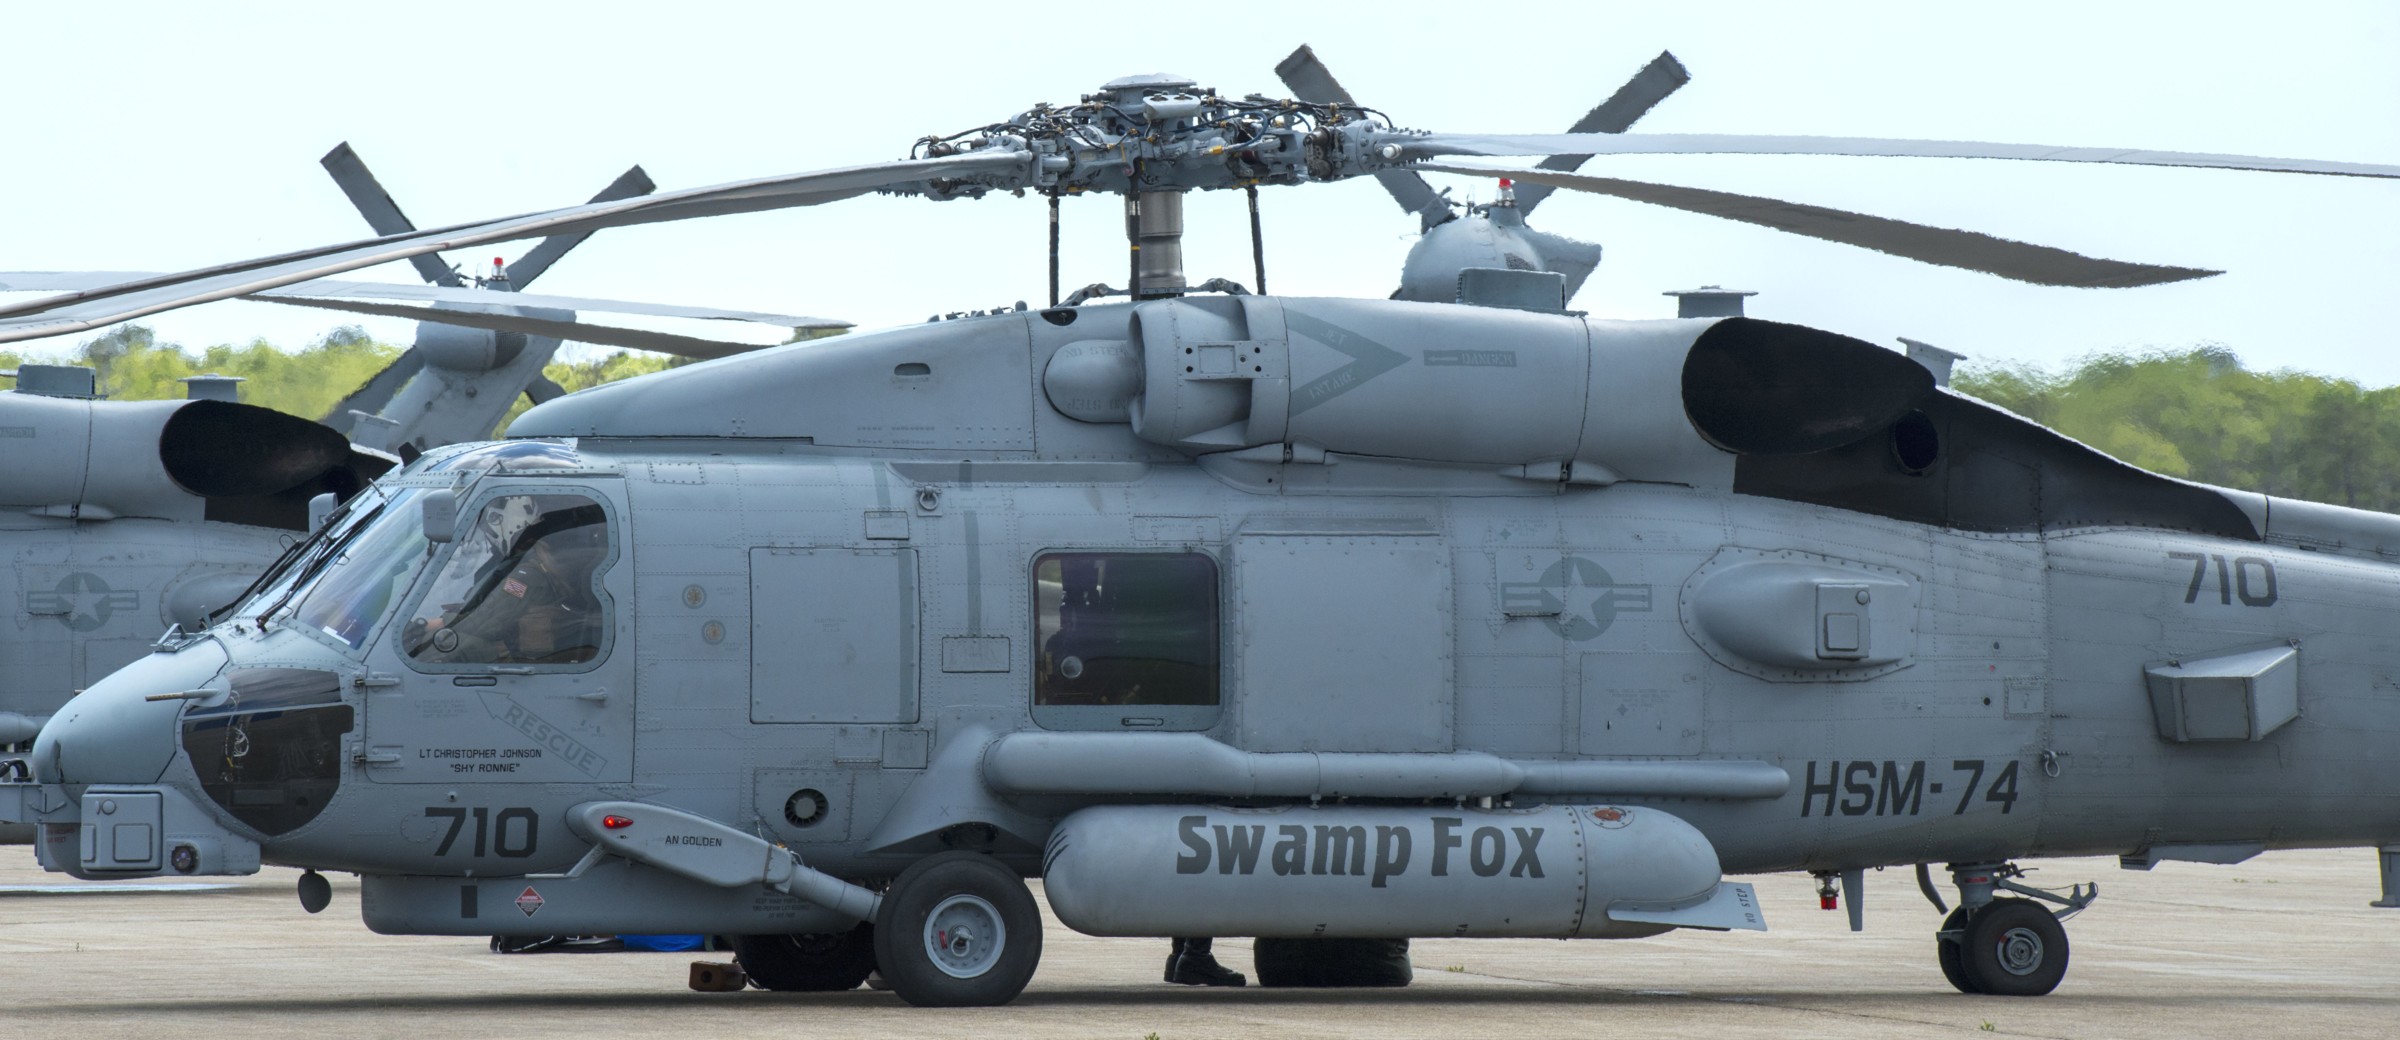 hsm-74 swamp foxes helicopter maritime strike squadron mh-60r seahawk cape cod joint base 34